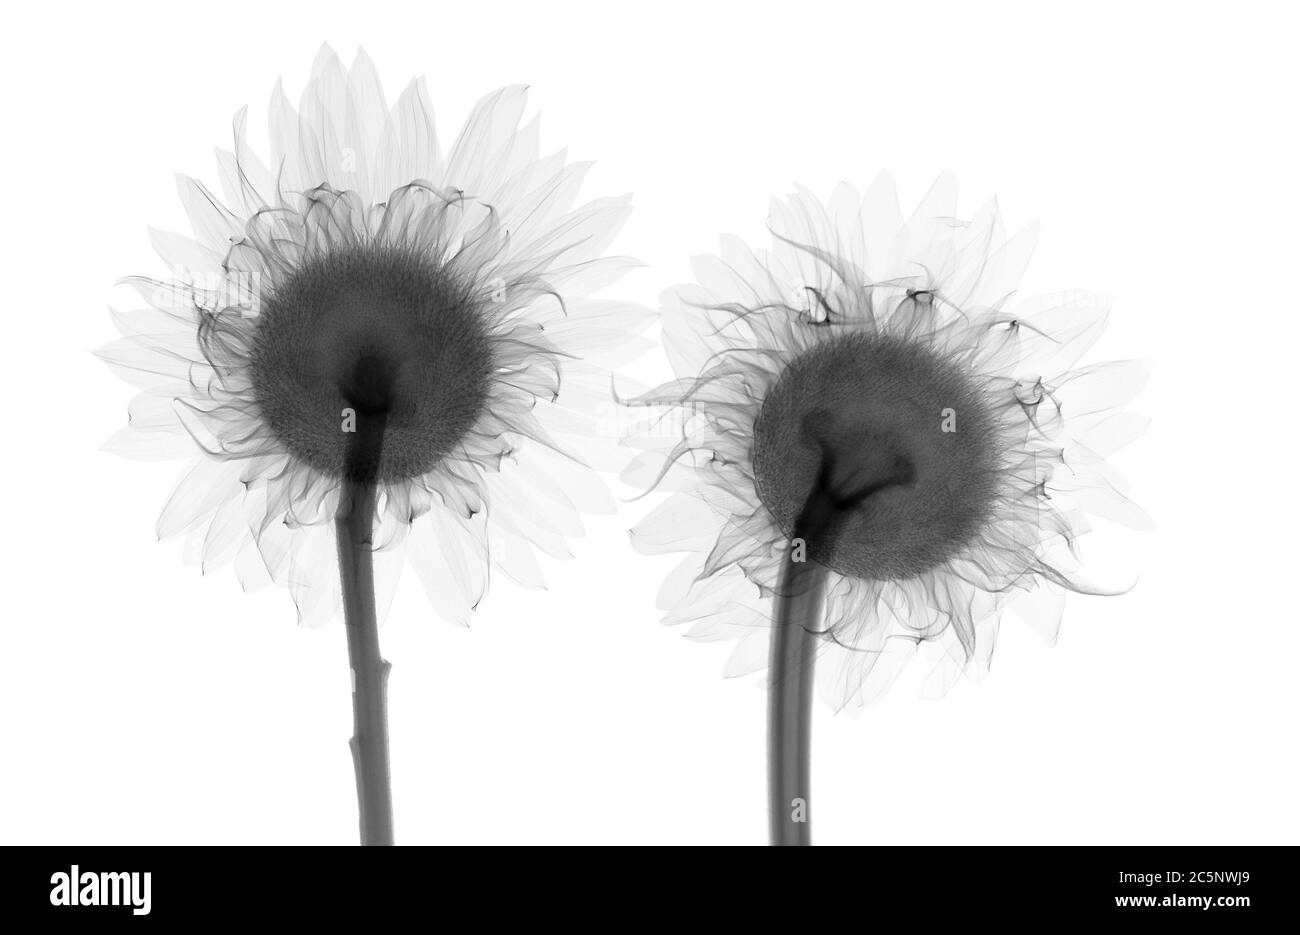 Two sunflowers (Helianthus sp.), X-ray. Stock Photo